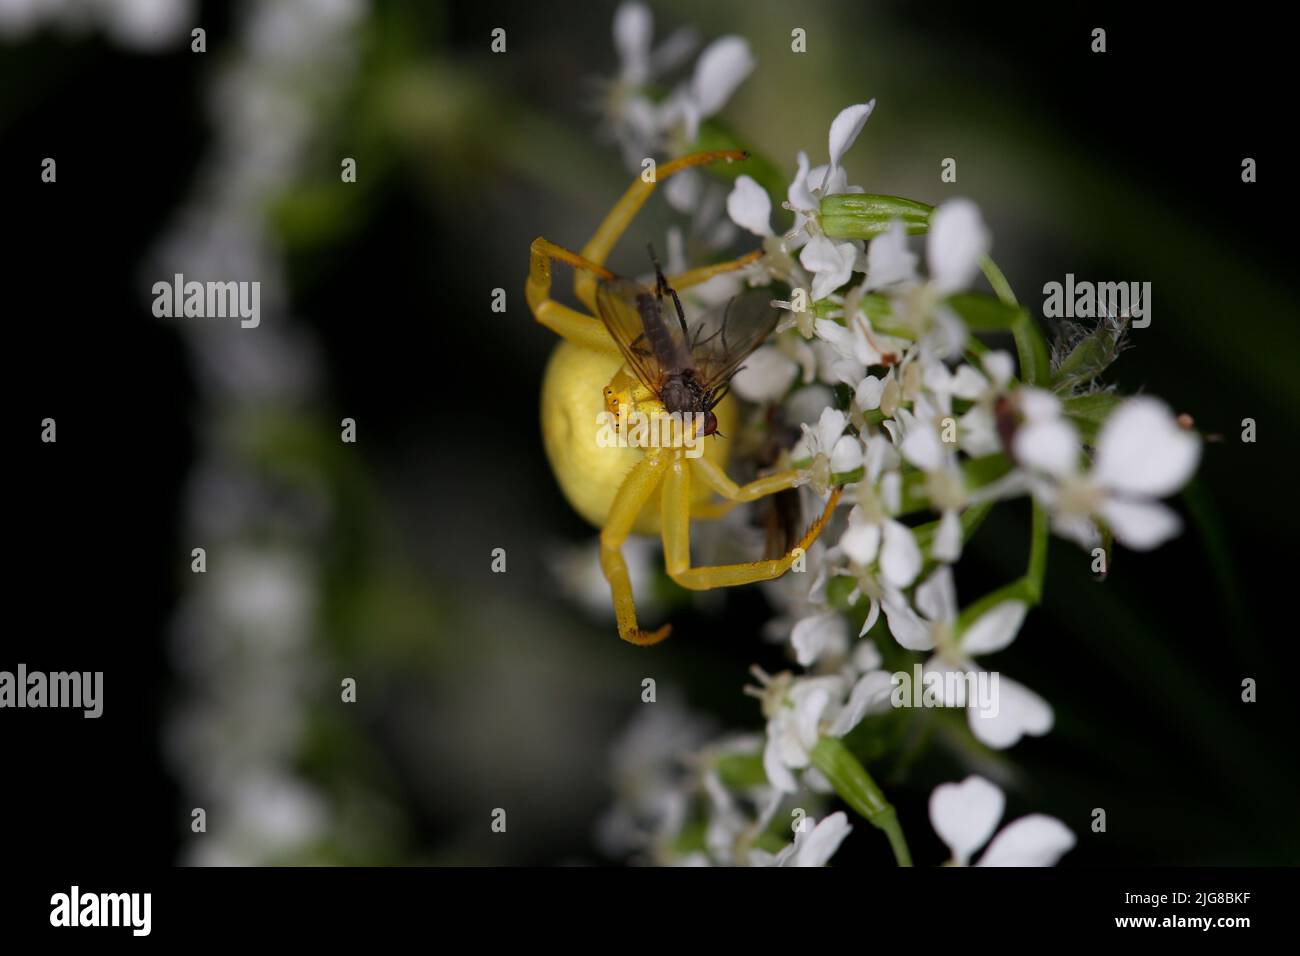 Female of the goldenrod crab spider (Misumena vatia) with captured fly on the flower of meadow chervil Stock Photo